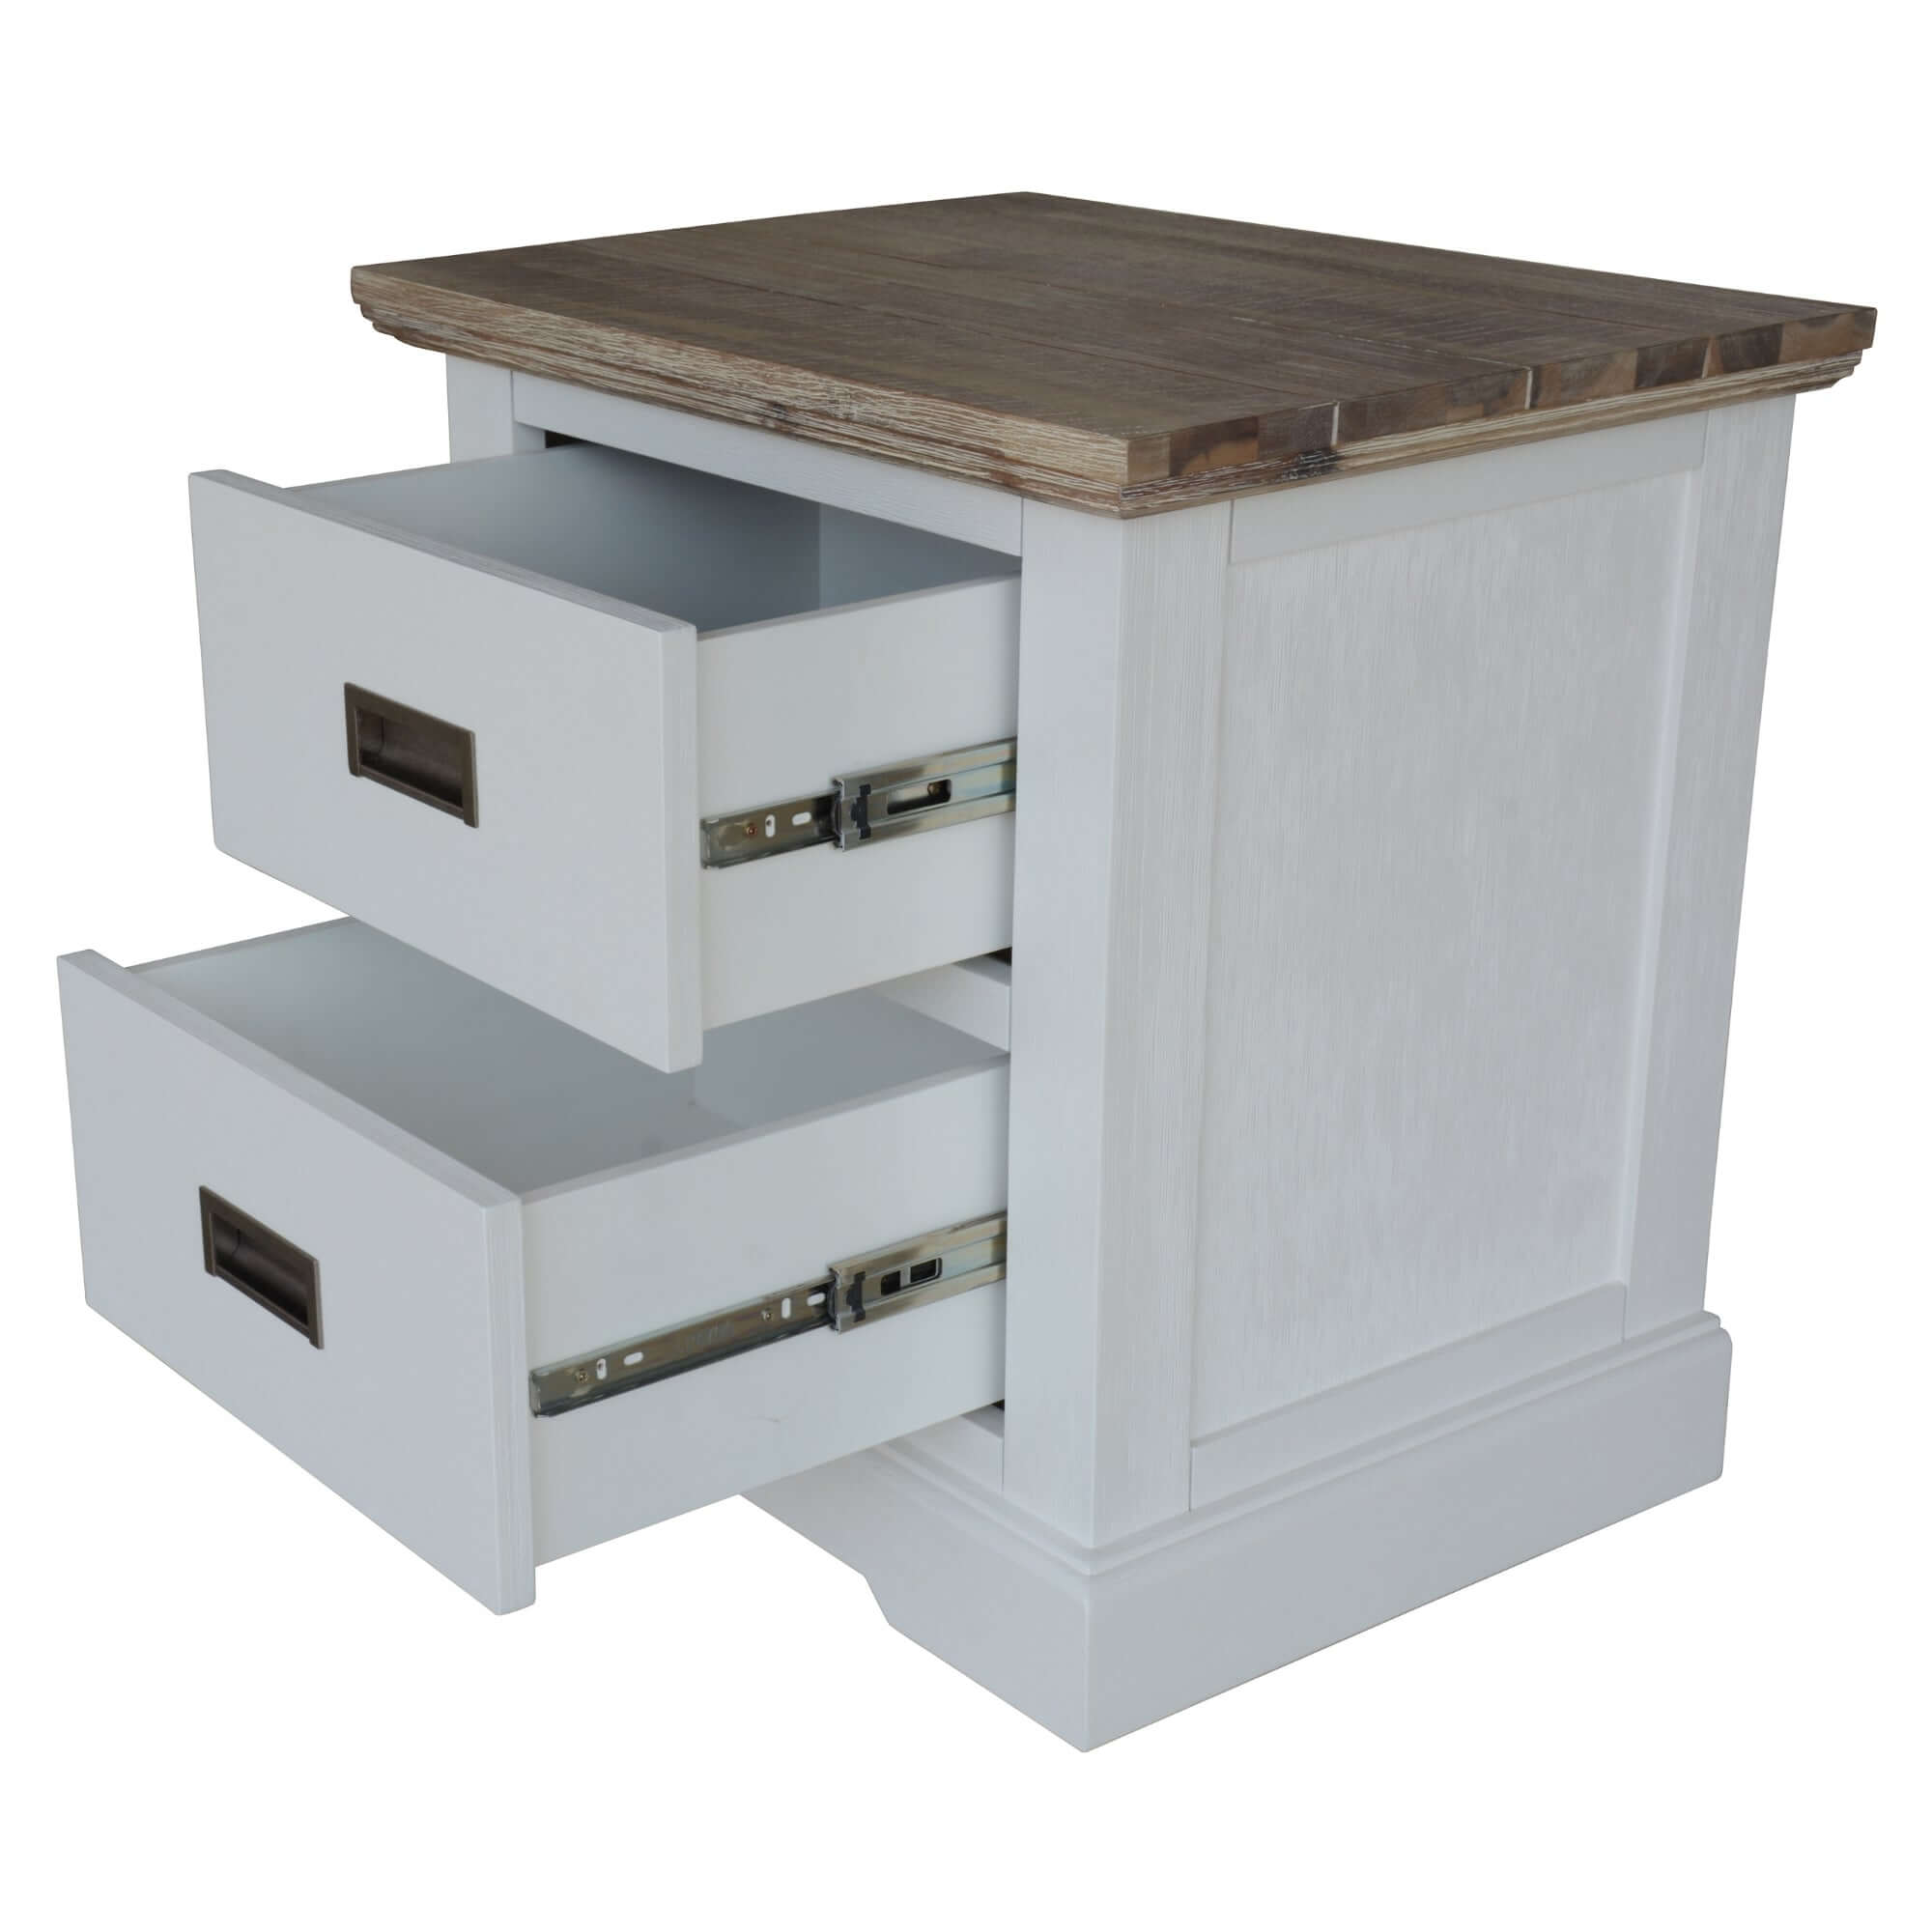 Fiona Bedside Table Set - 2 Drawer Nightstand-Upinteriors